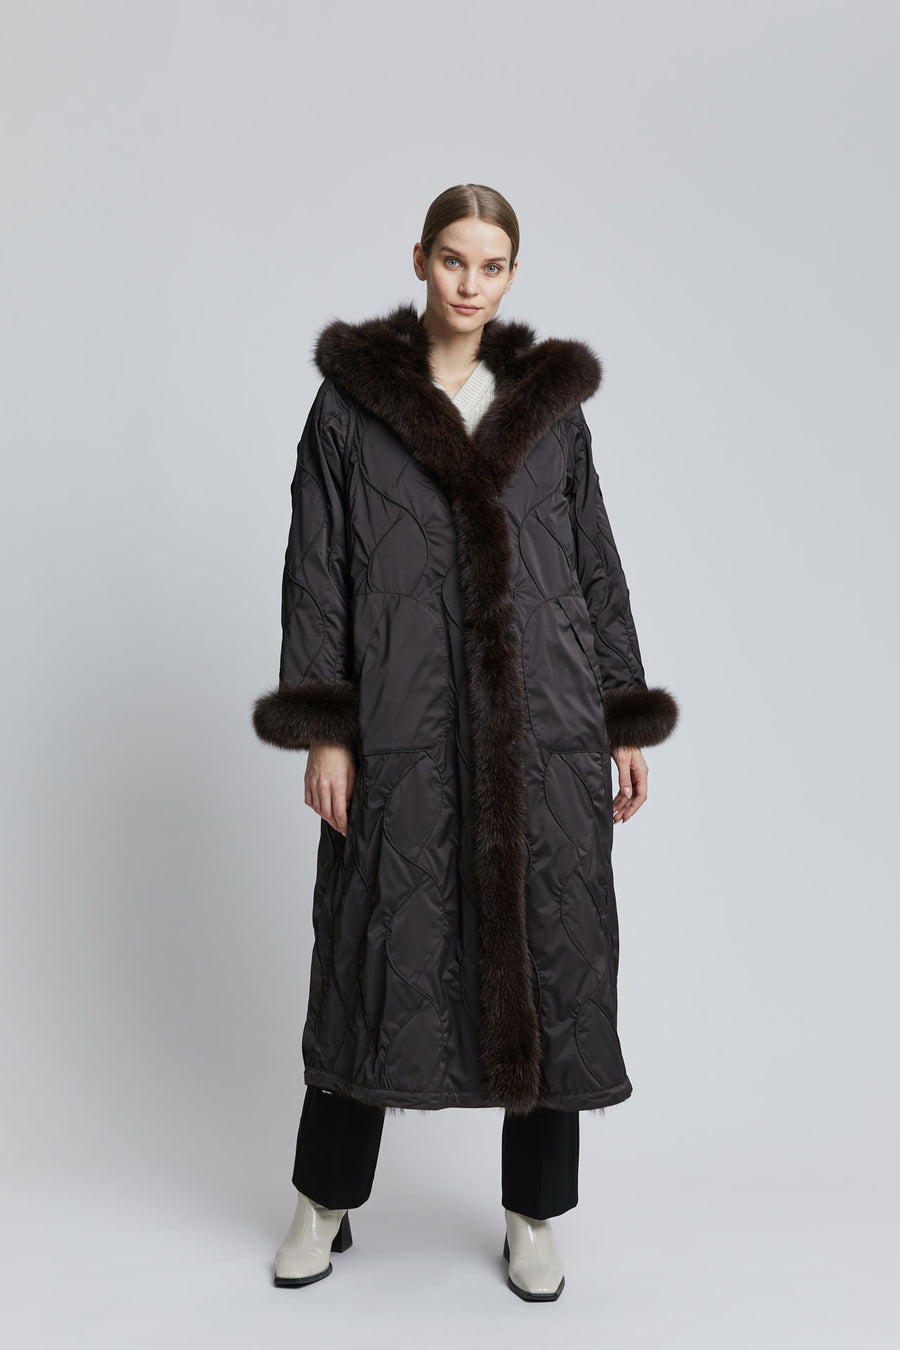  A-lined reversible black fur coat has a large hood, fur trim along the front and hood, fur cuffs and a braided pattern